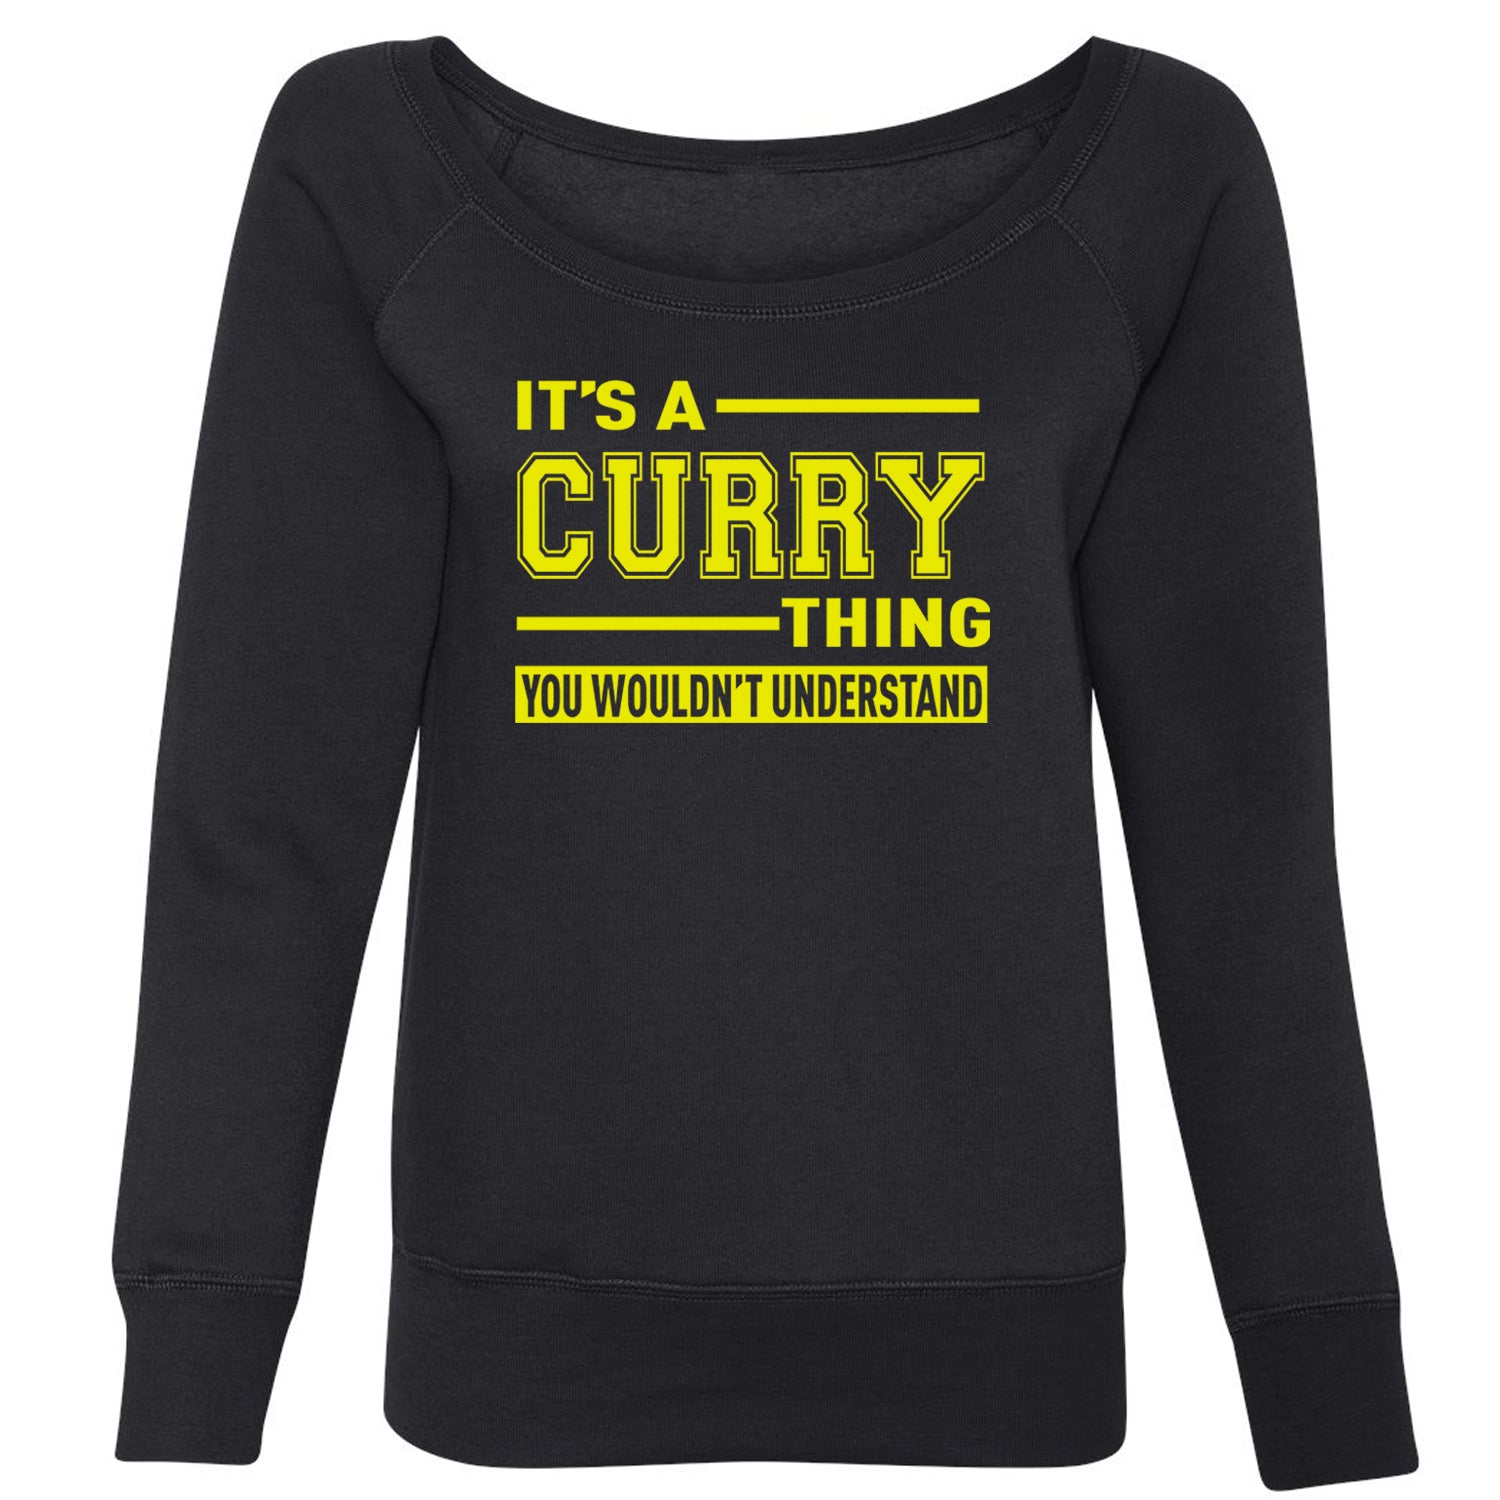 It's A Curry Thing, You Wouldn't Understand Basketball Slouchy Off Shoulder Oversized Sweatshirt